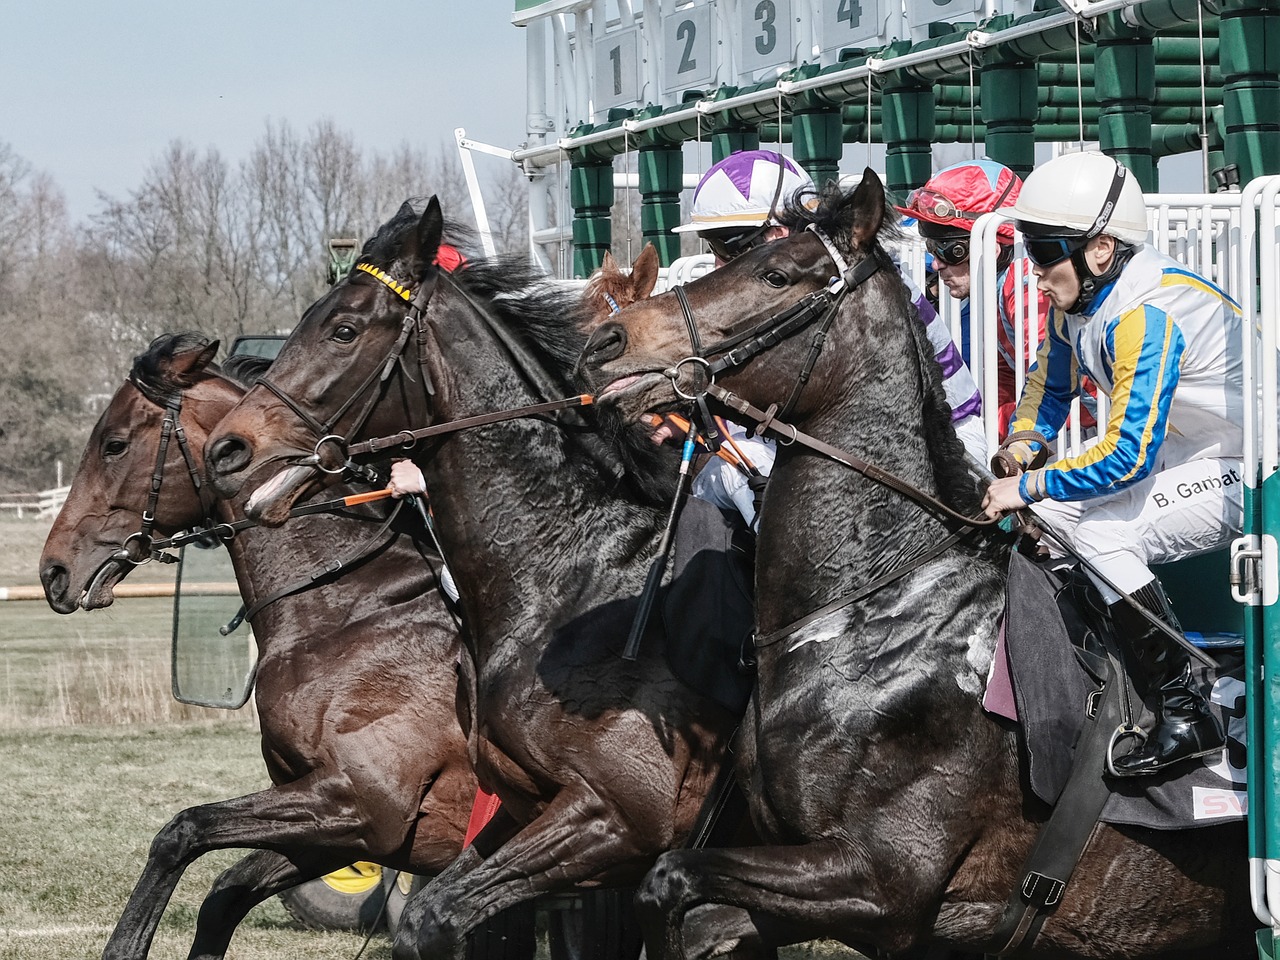 bremer rennverein horse racing the day of the race free photo